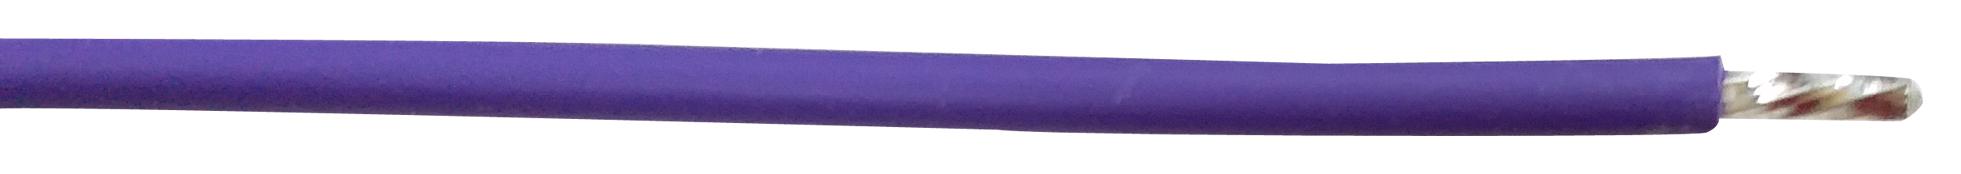 PP002430 HOOK-UP WIRE, 28AWG, PURPLE, 305M, 30V PRO POWER